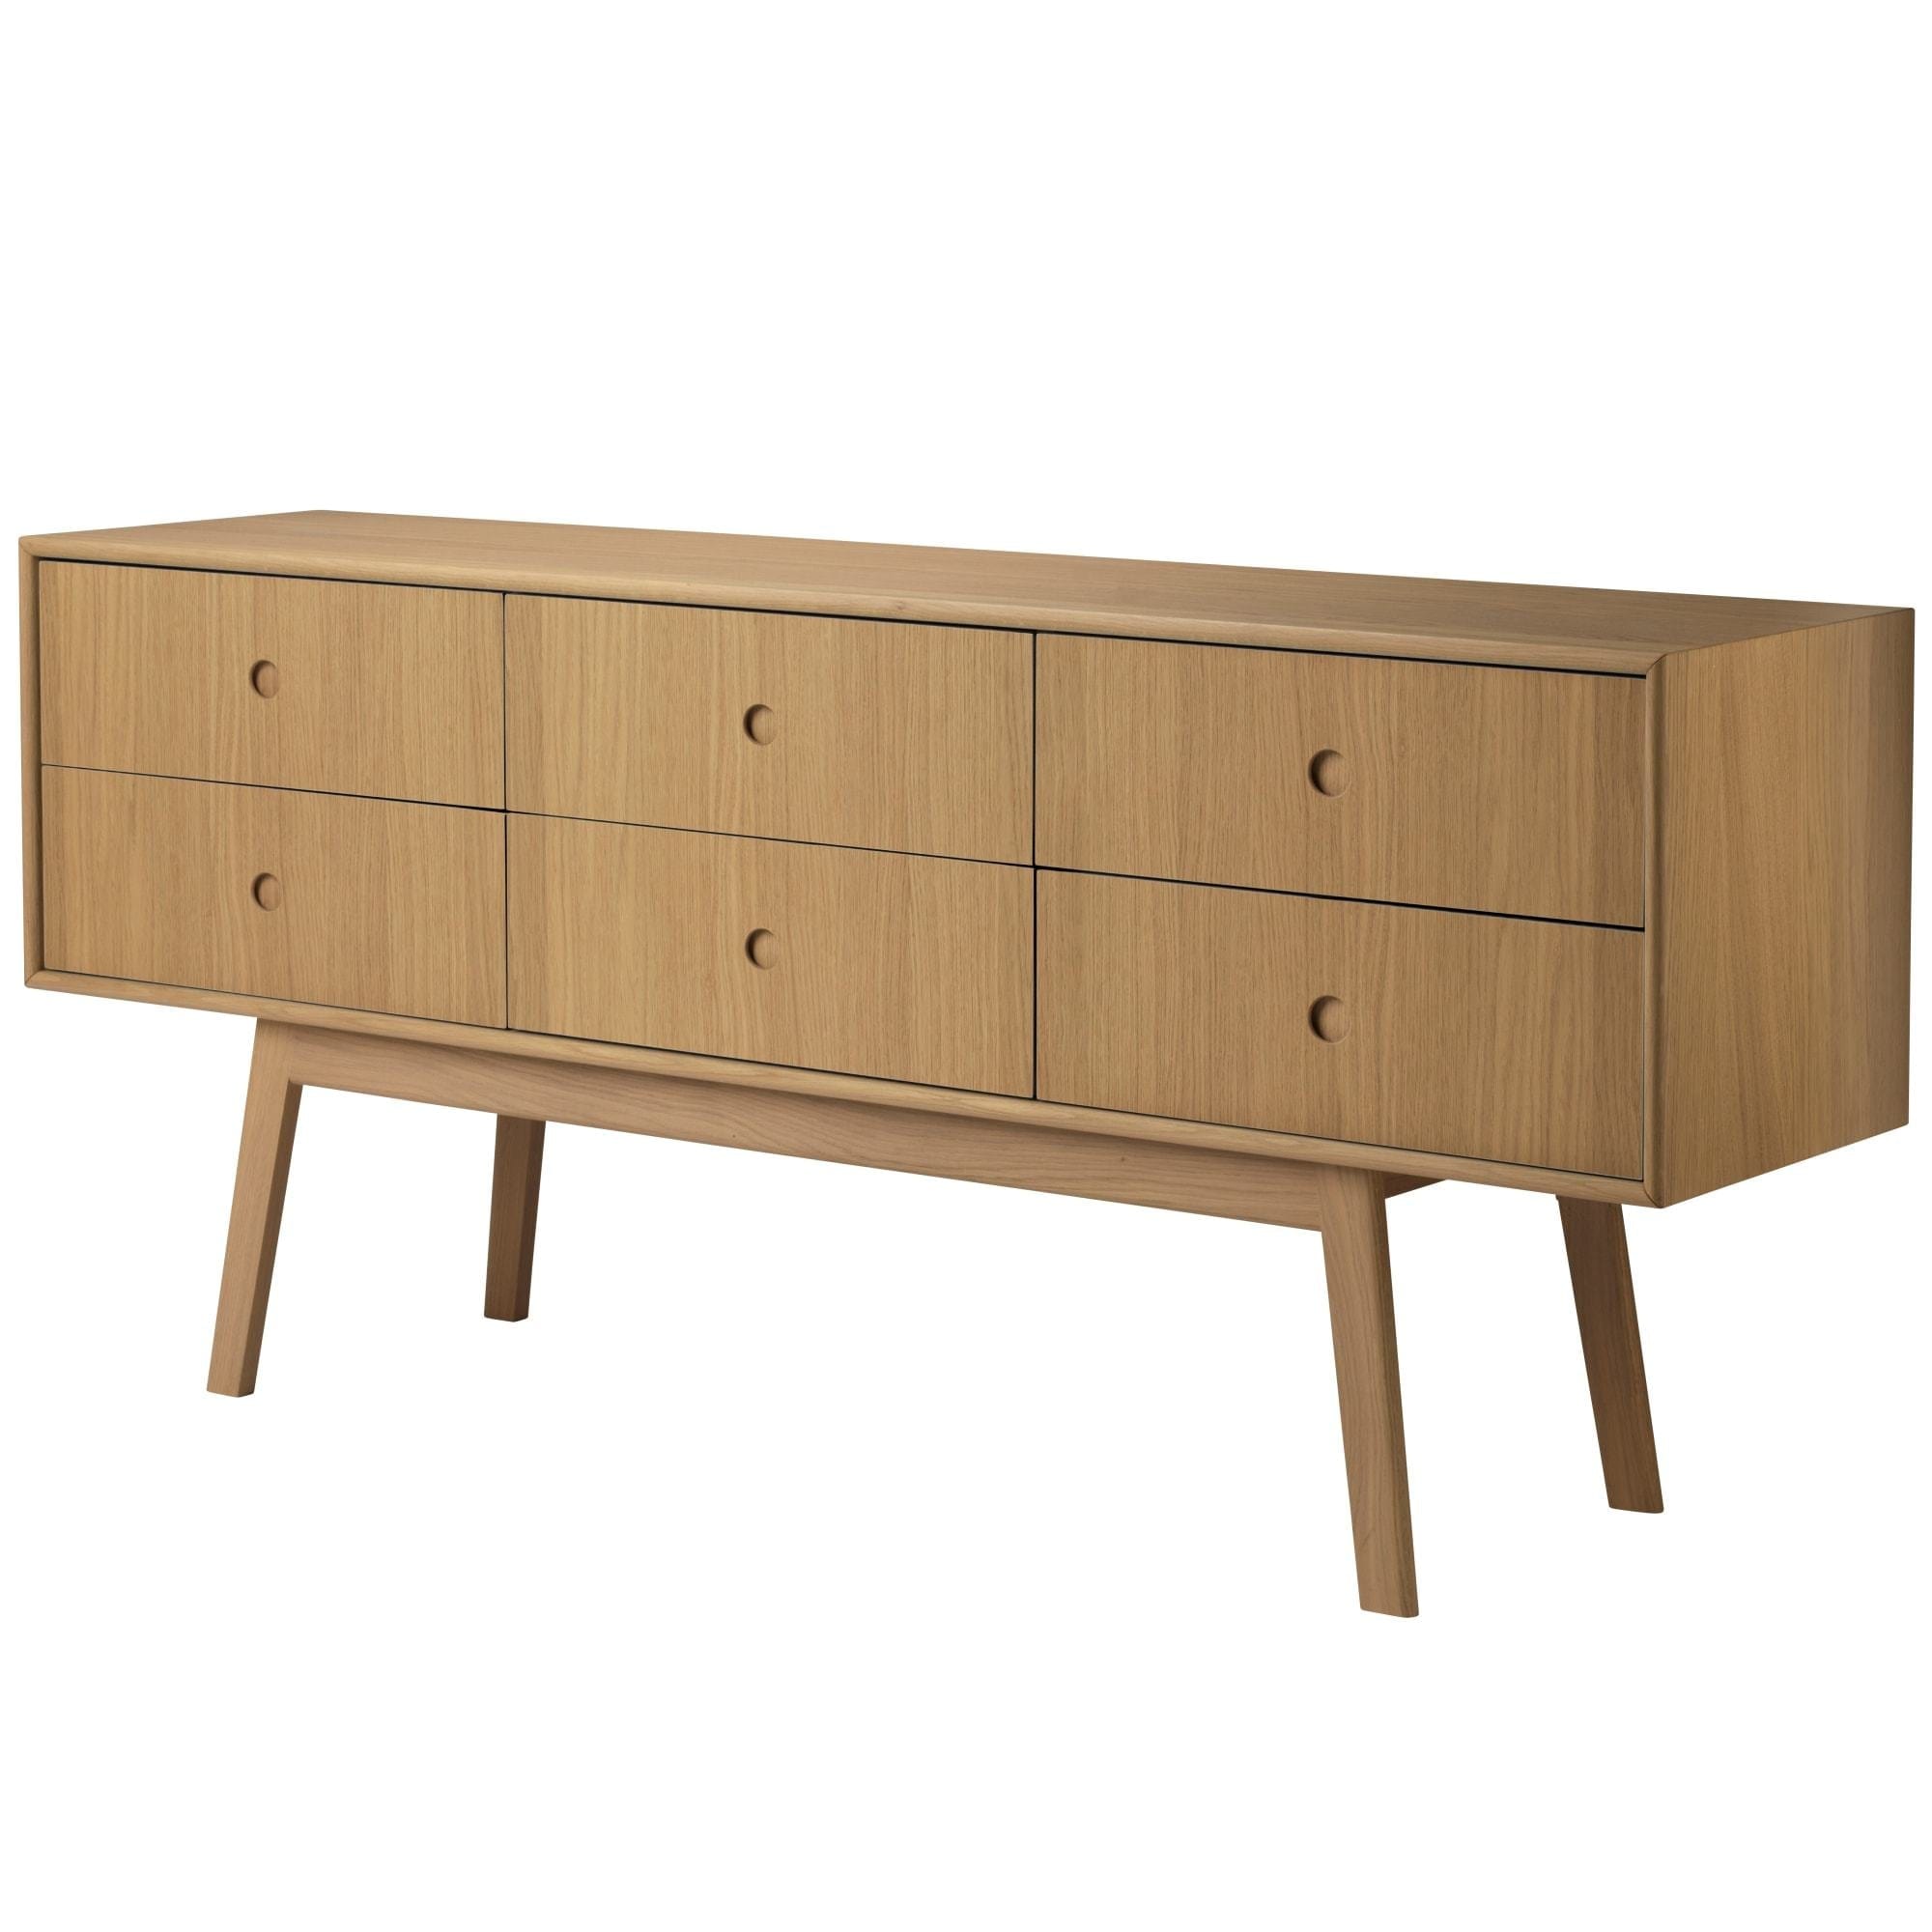 Fdb Møbler A86 Butler Chest Of Drawers, Oak